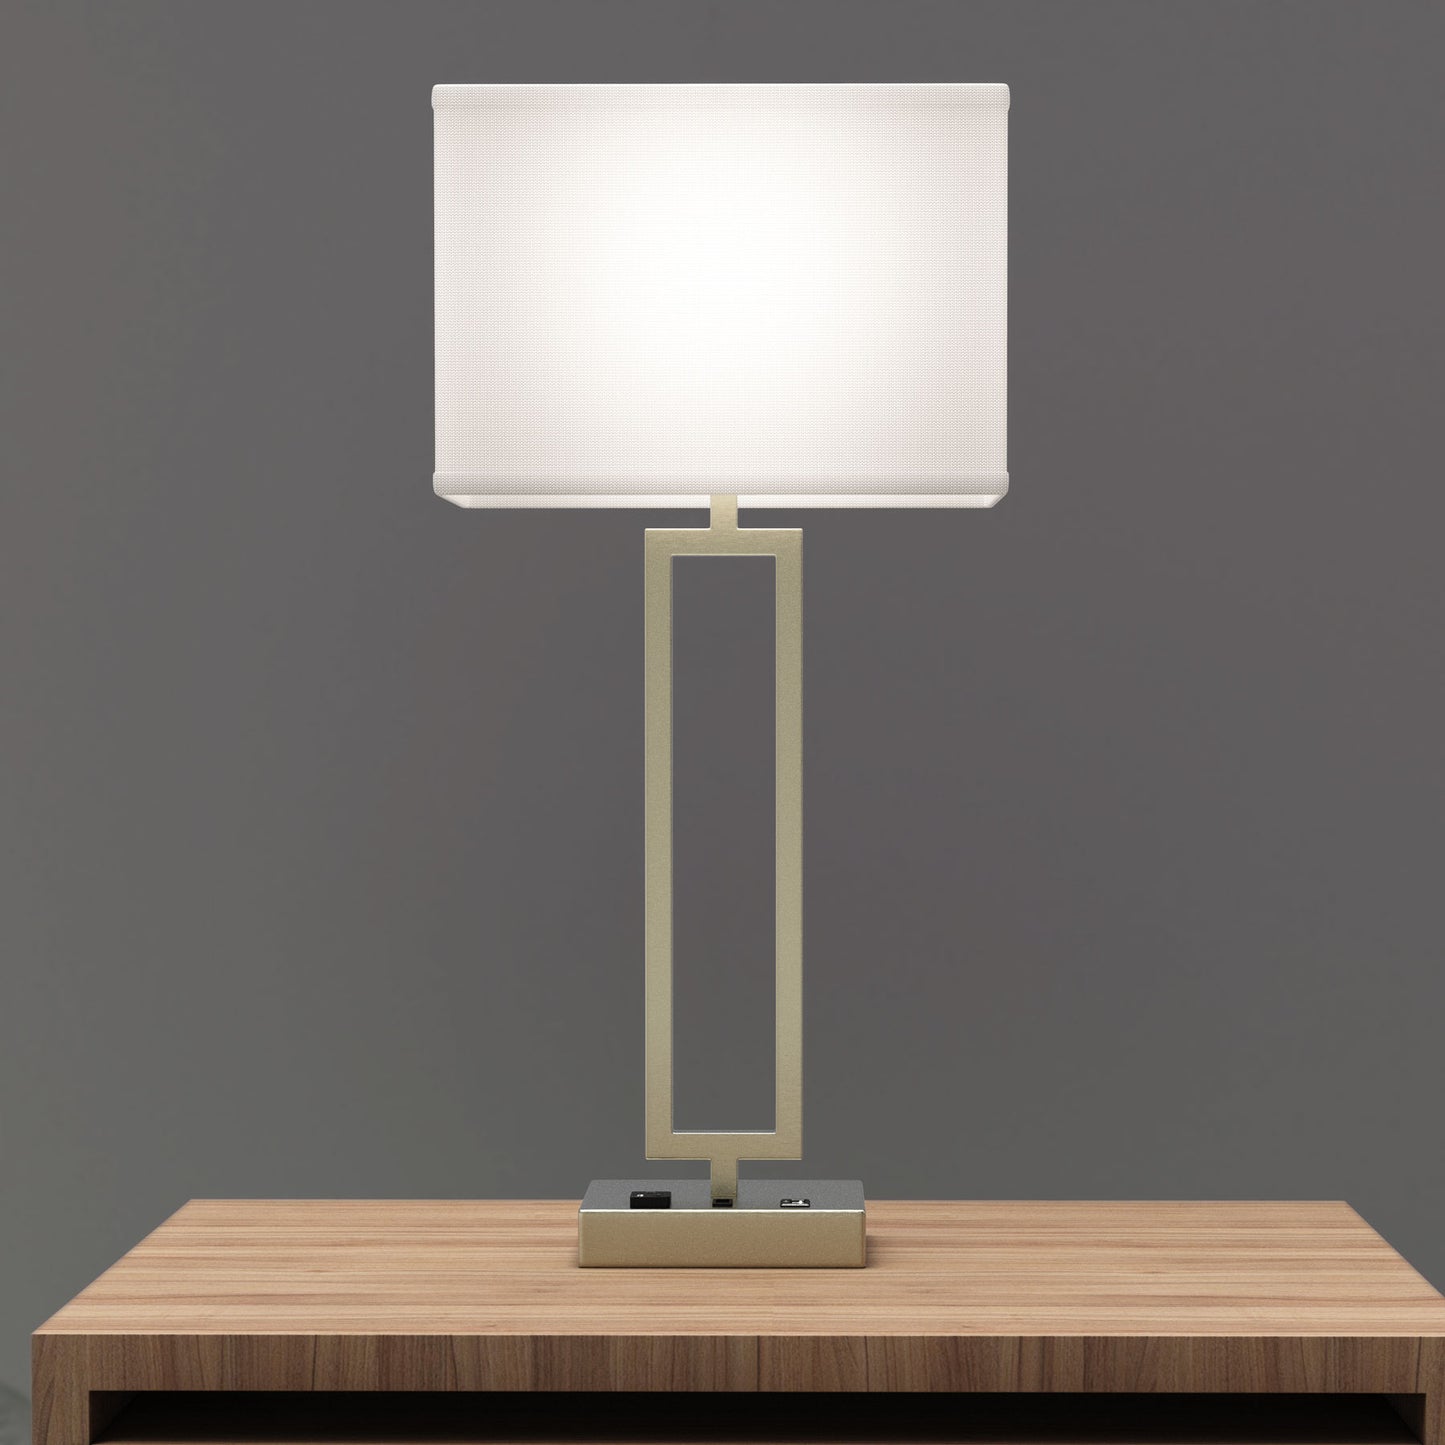 28-desk-lamp-with-usb-port-and-outlet